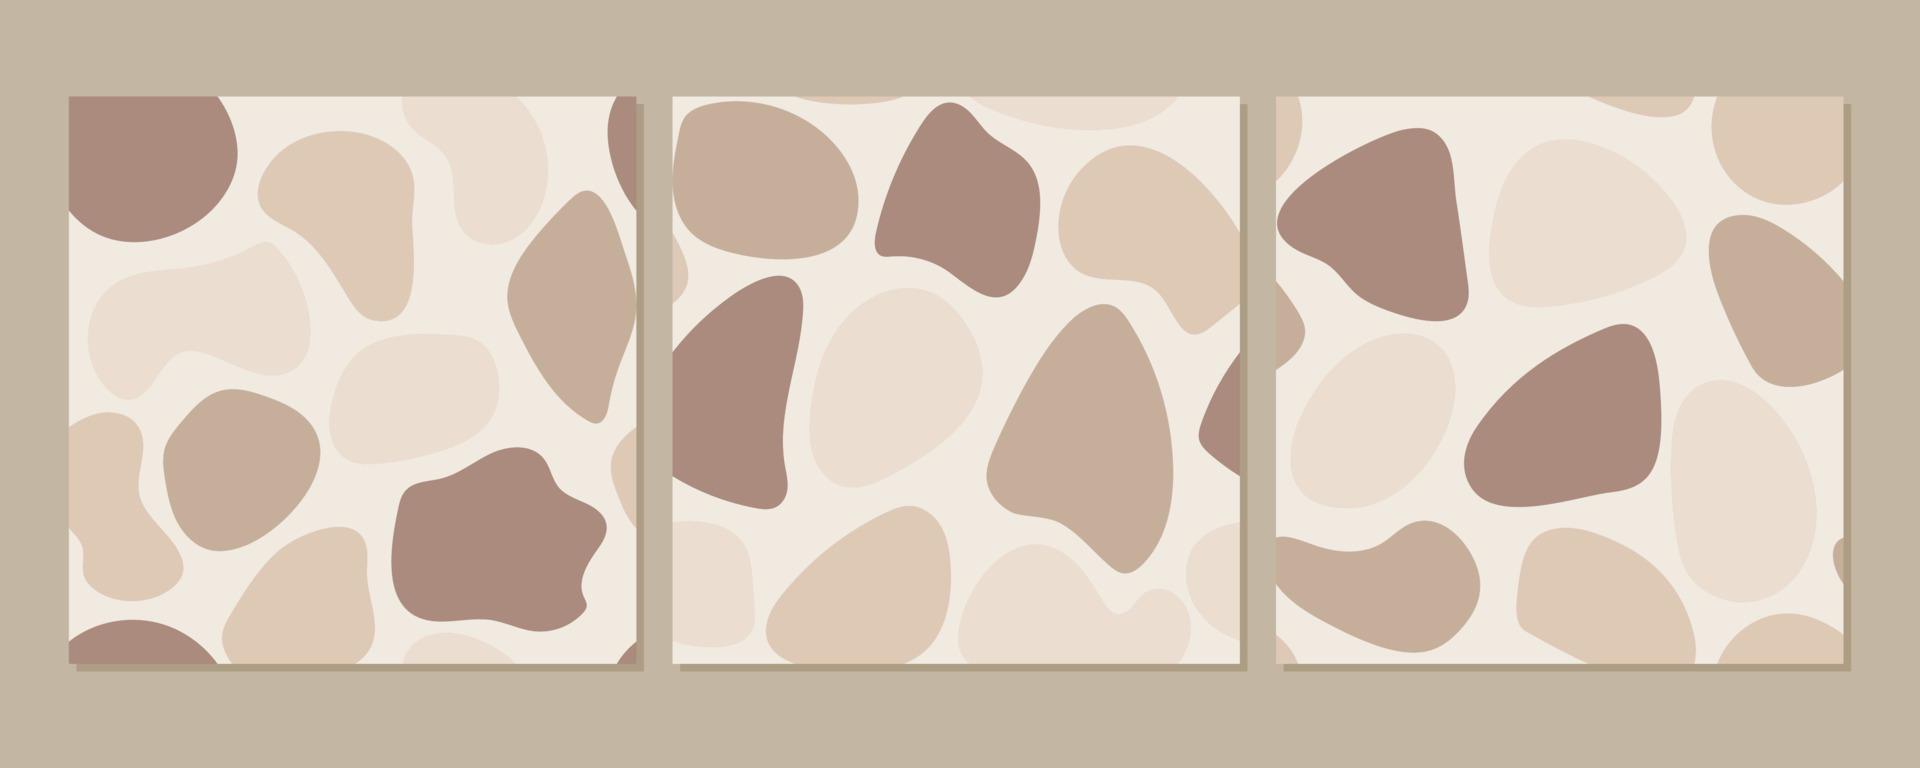 TTrendy stylish vector seamless  pattern set with organic abstract shapes and lines in pastel nude colors. Neutral beige, terracotta boho background.